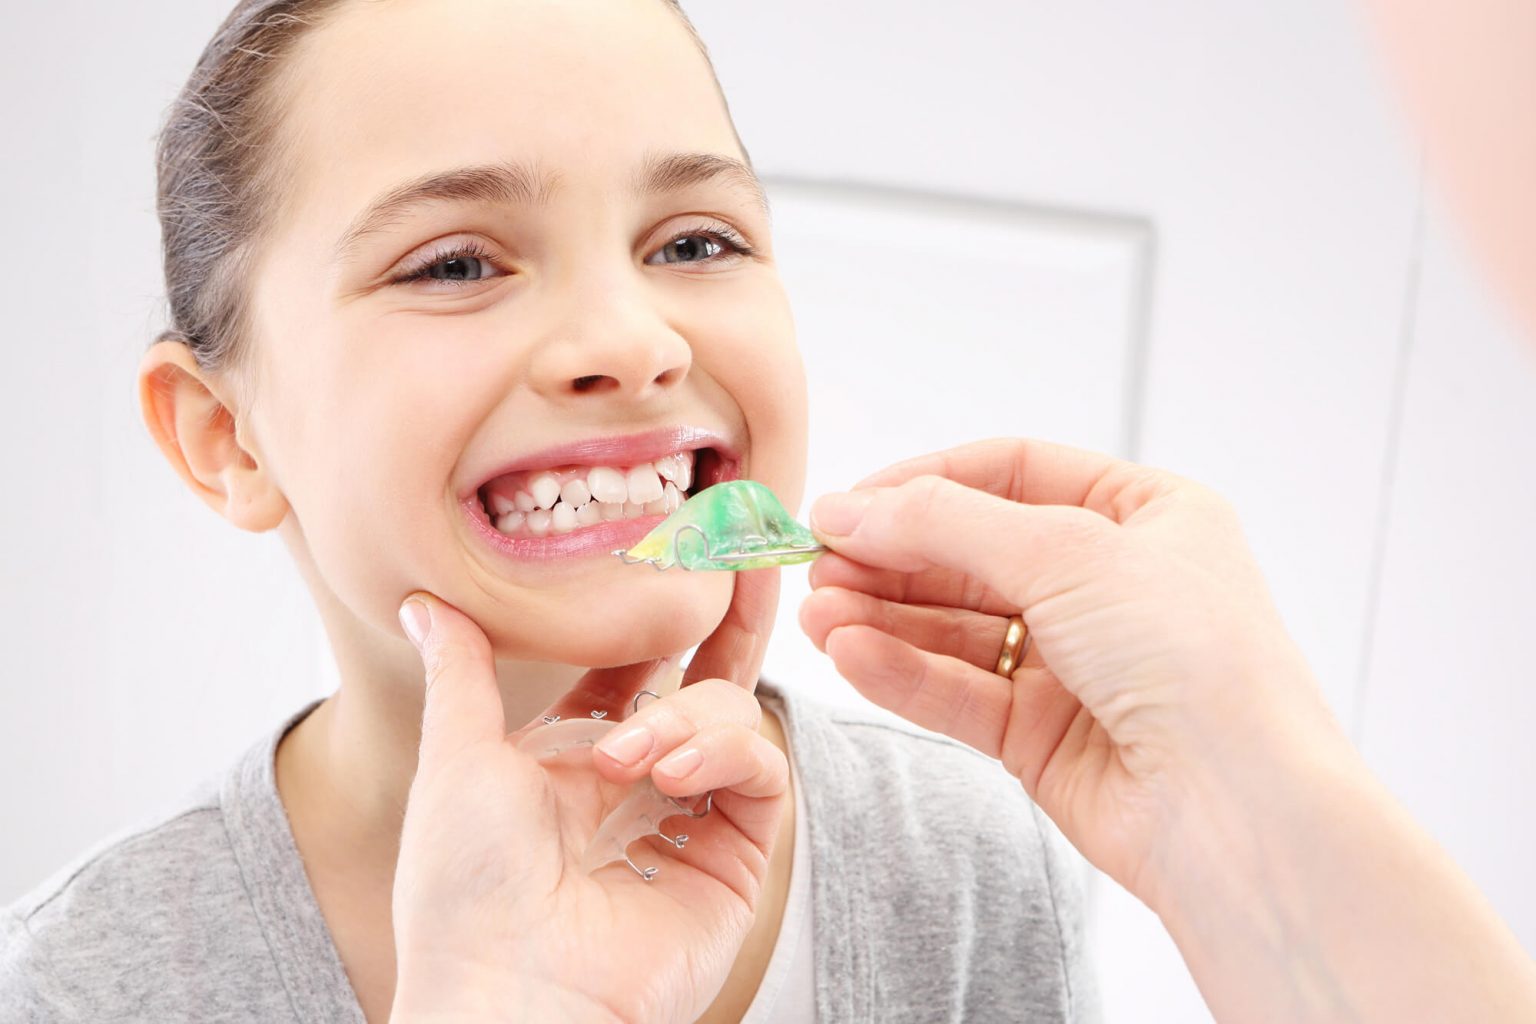 When Should My Child See a Kids Orthodontist?